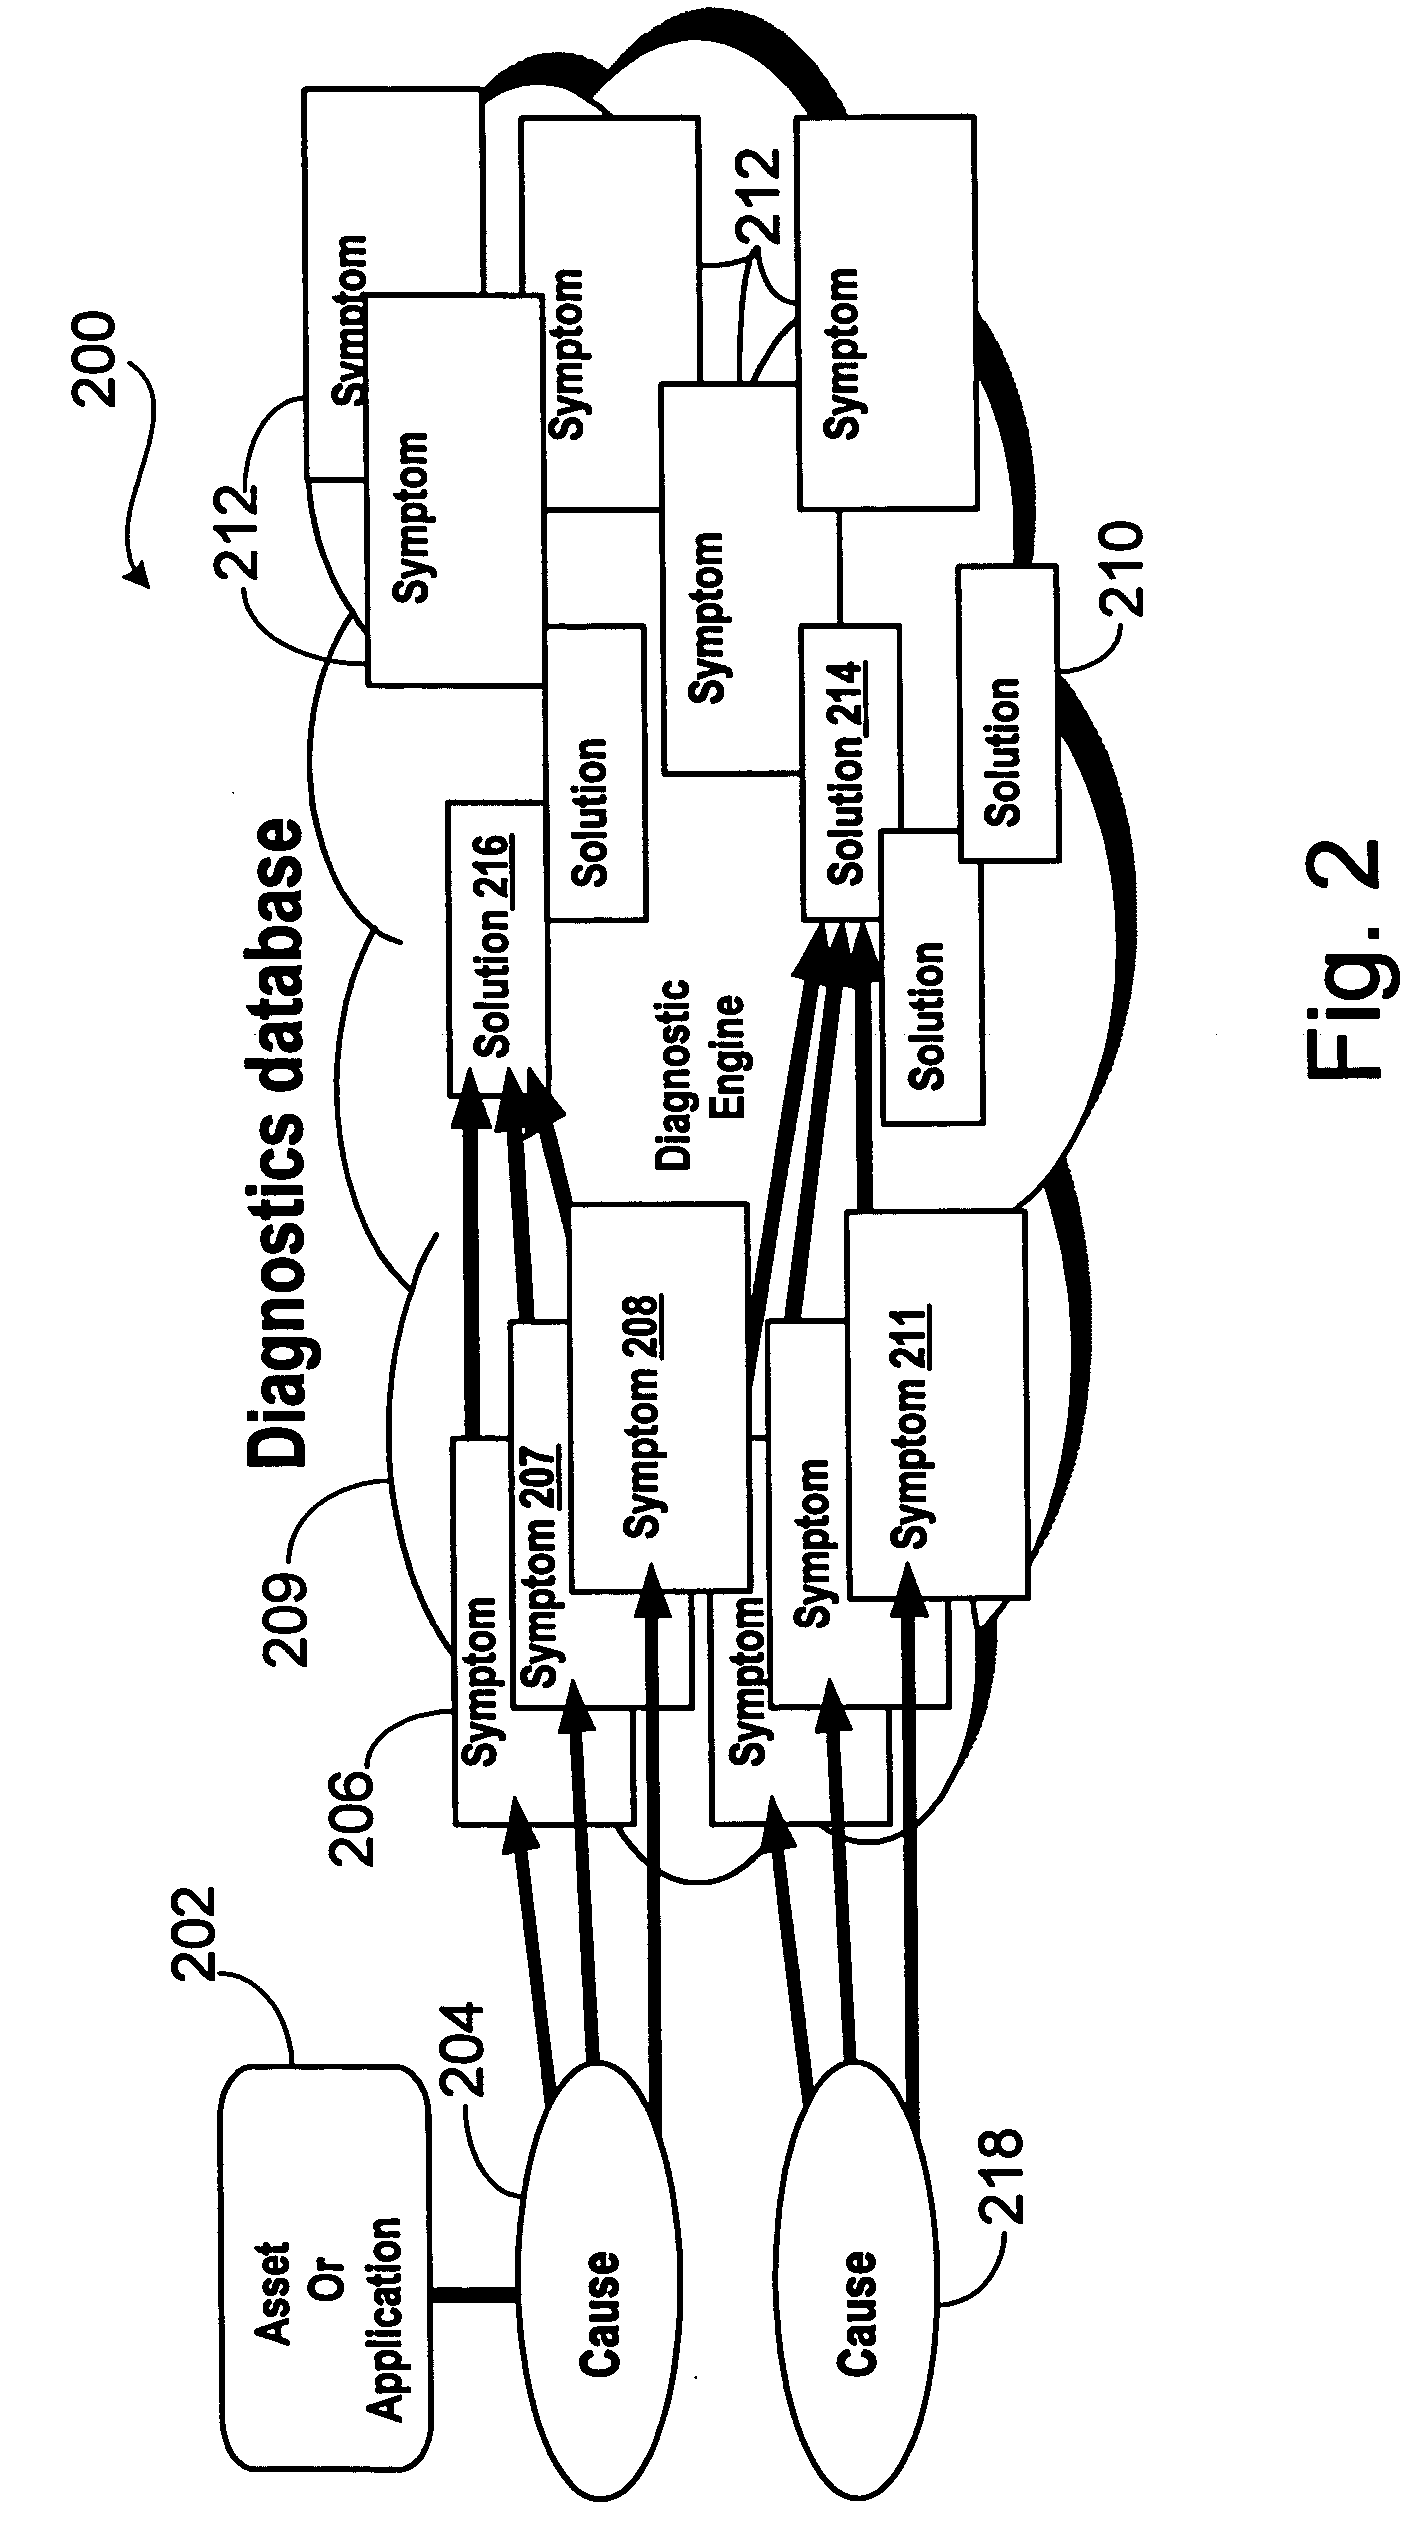 System and method for root cause linking of trouble tickets